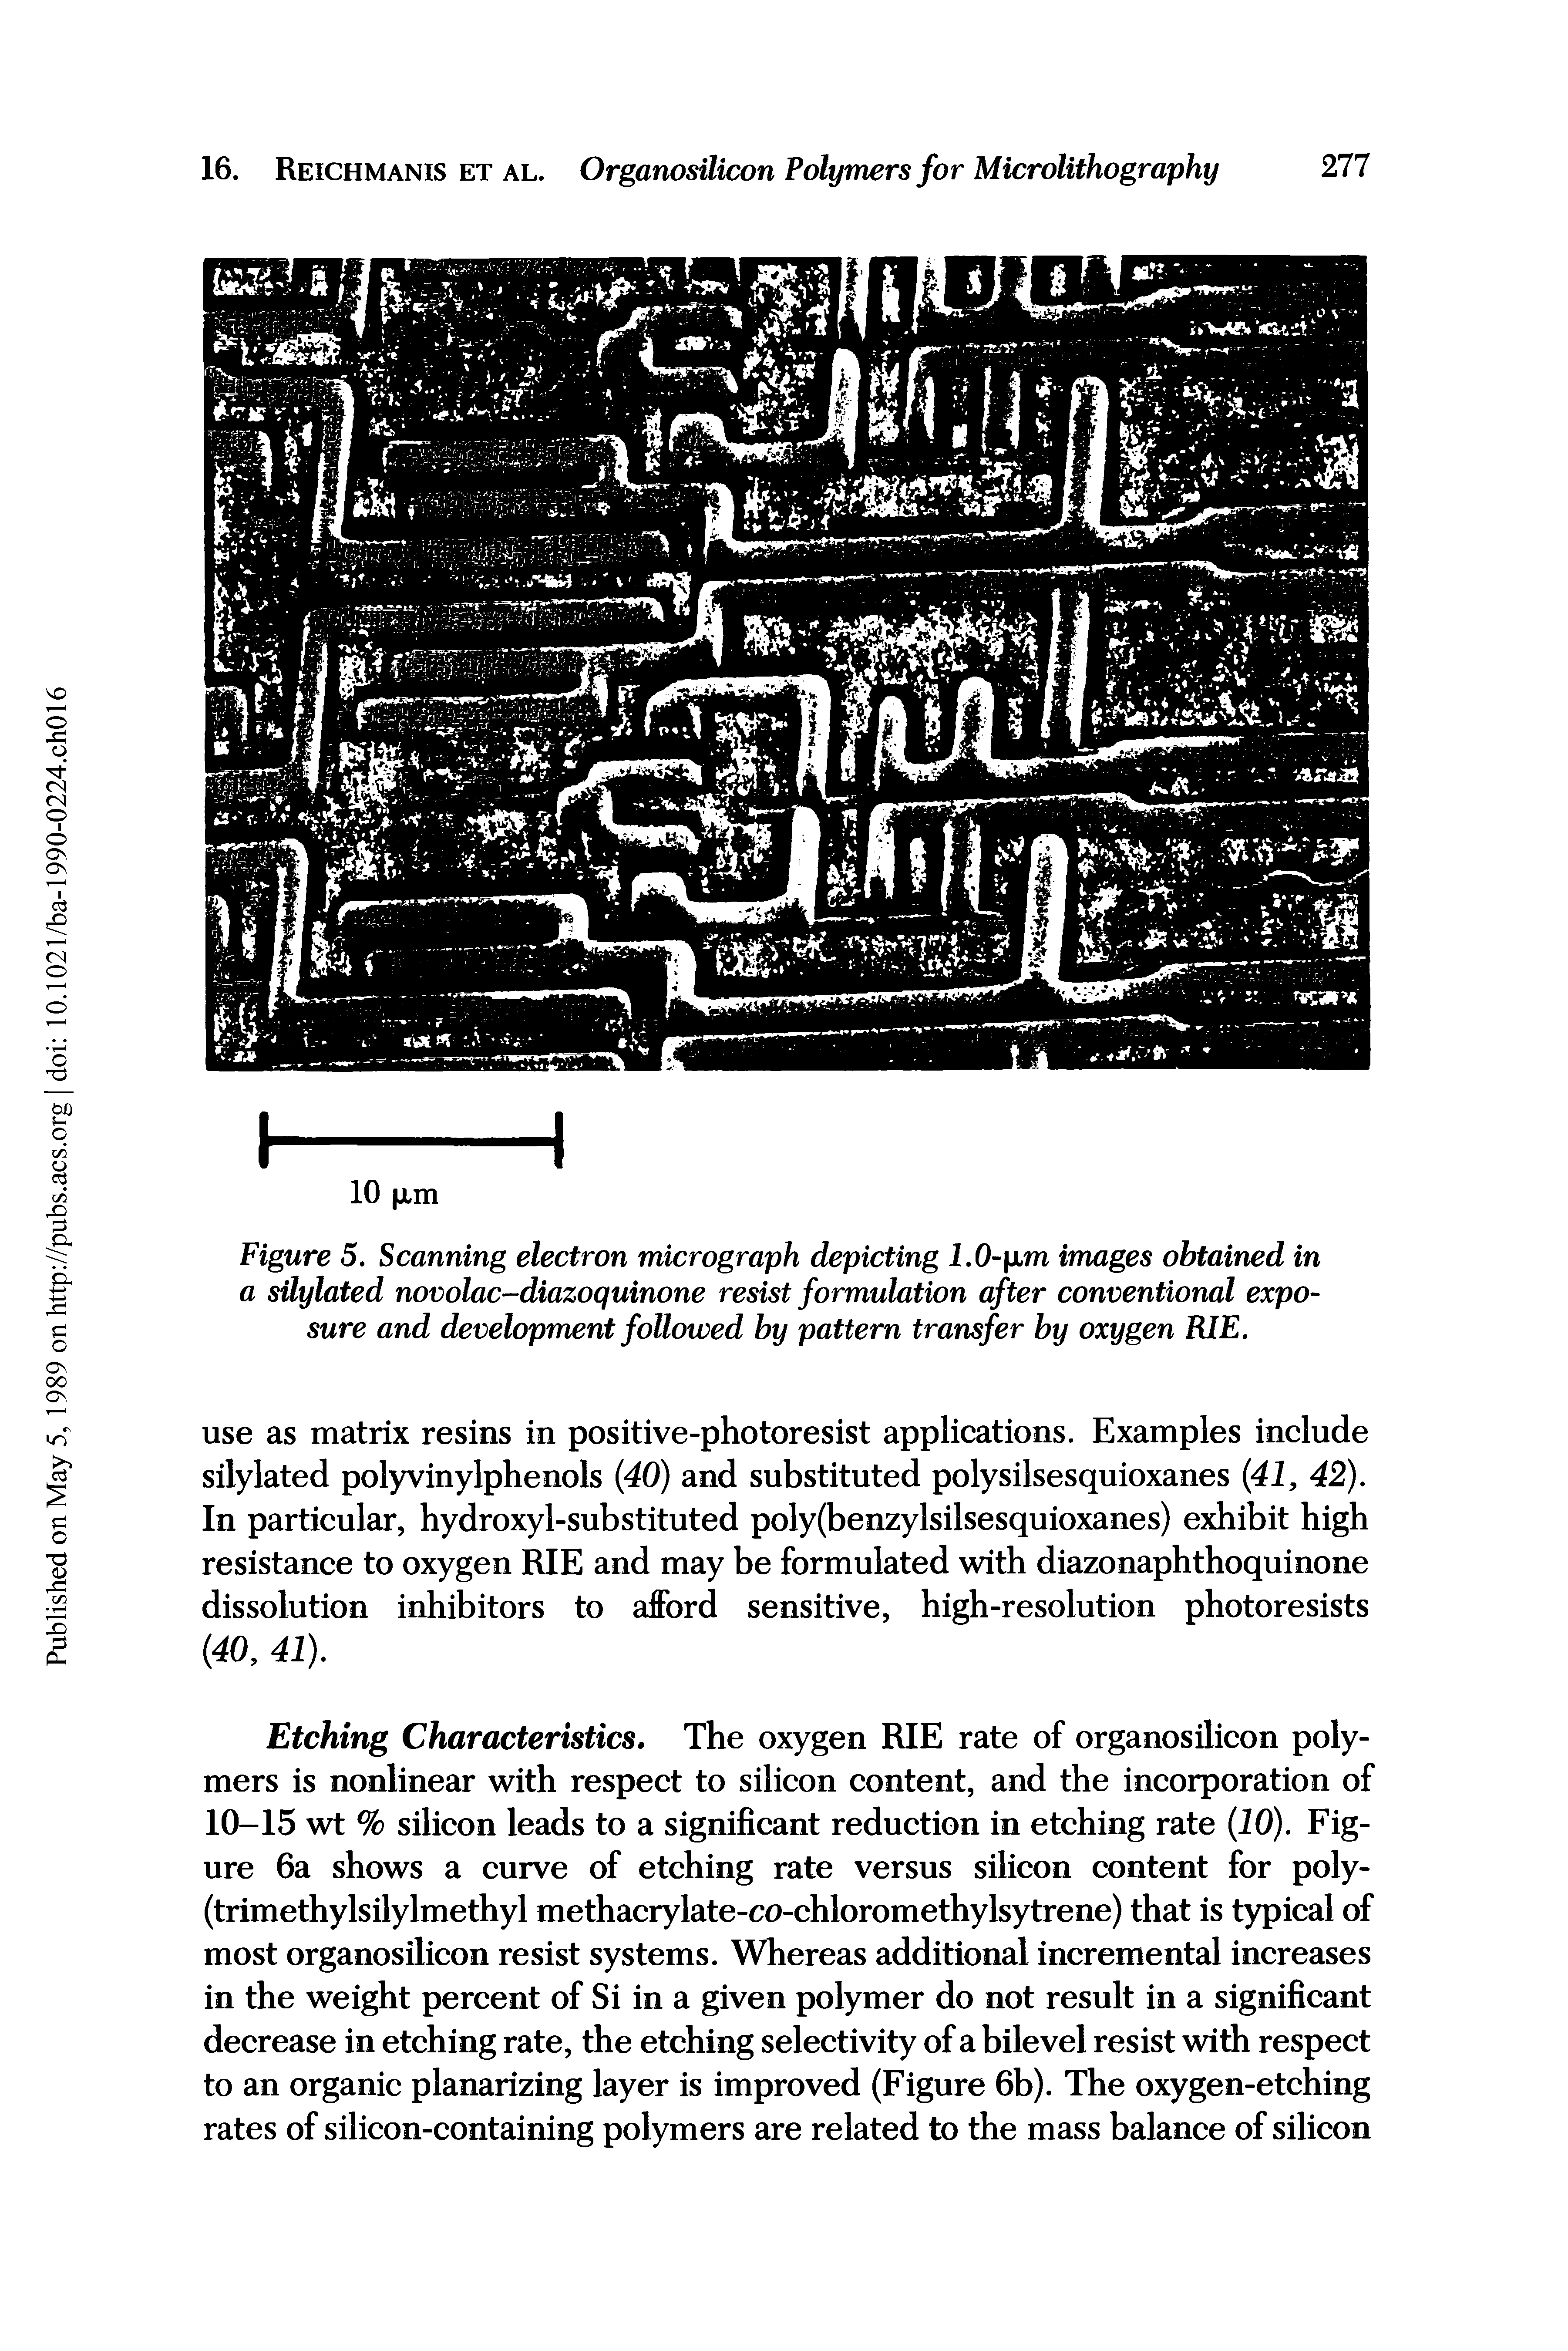 Figure 5. Scanning electron micrograph depicting 1.0- xm images obtained in a silylated novolac-diazoquinone resist formulation after conventional exposure and development followed by pattern transfer by oxygen RIE.